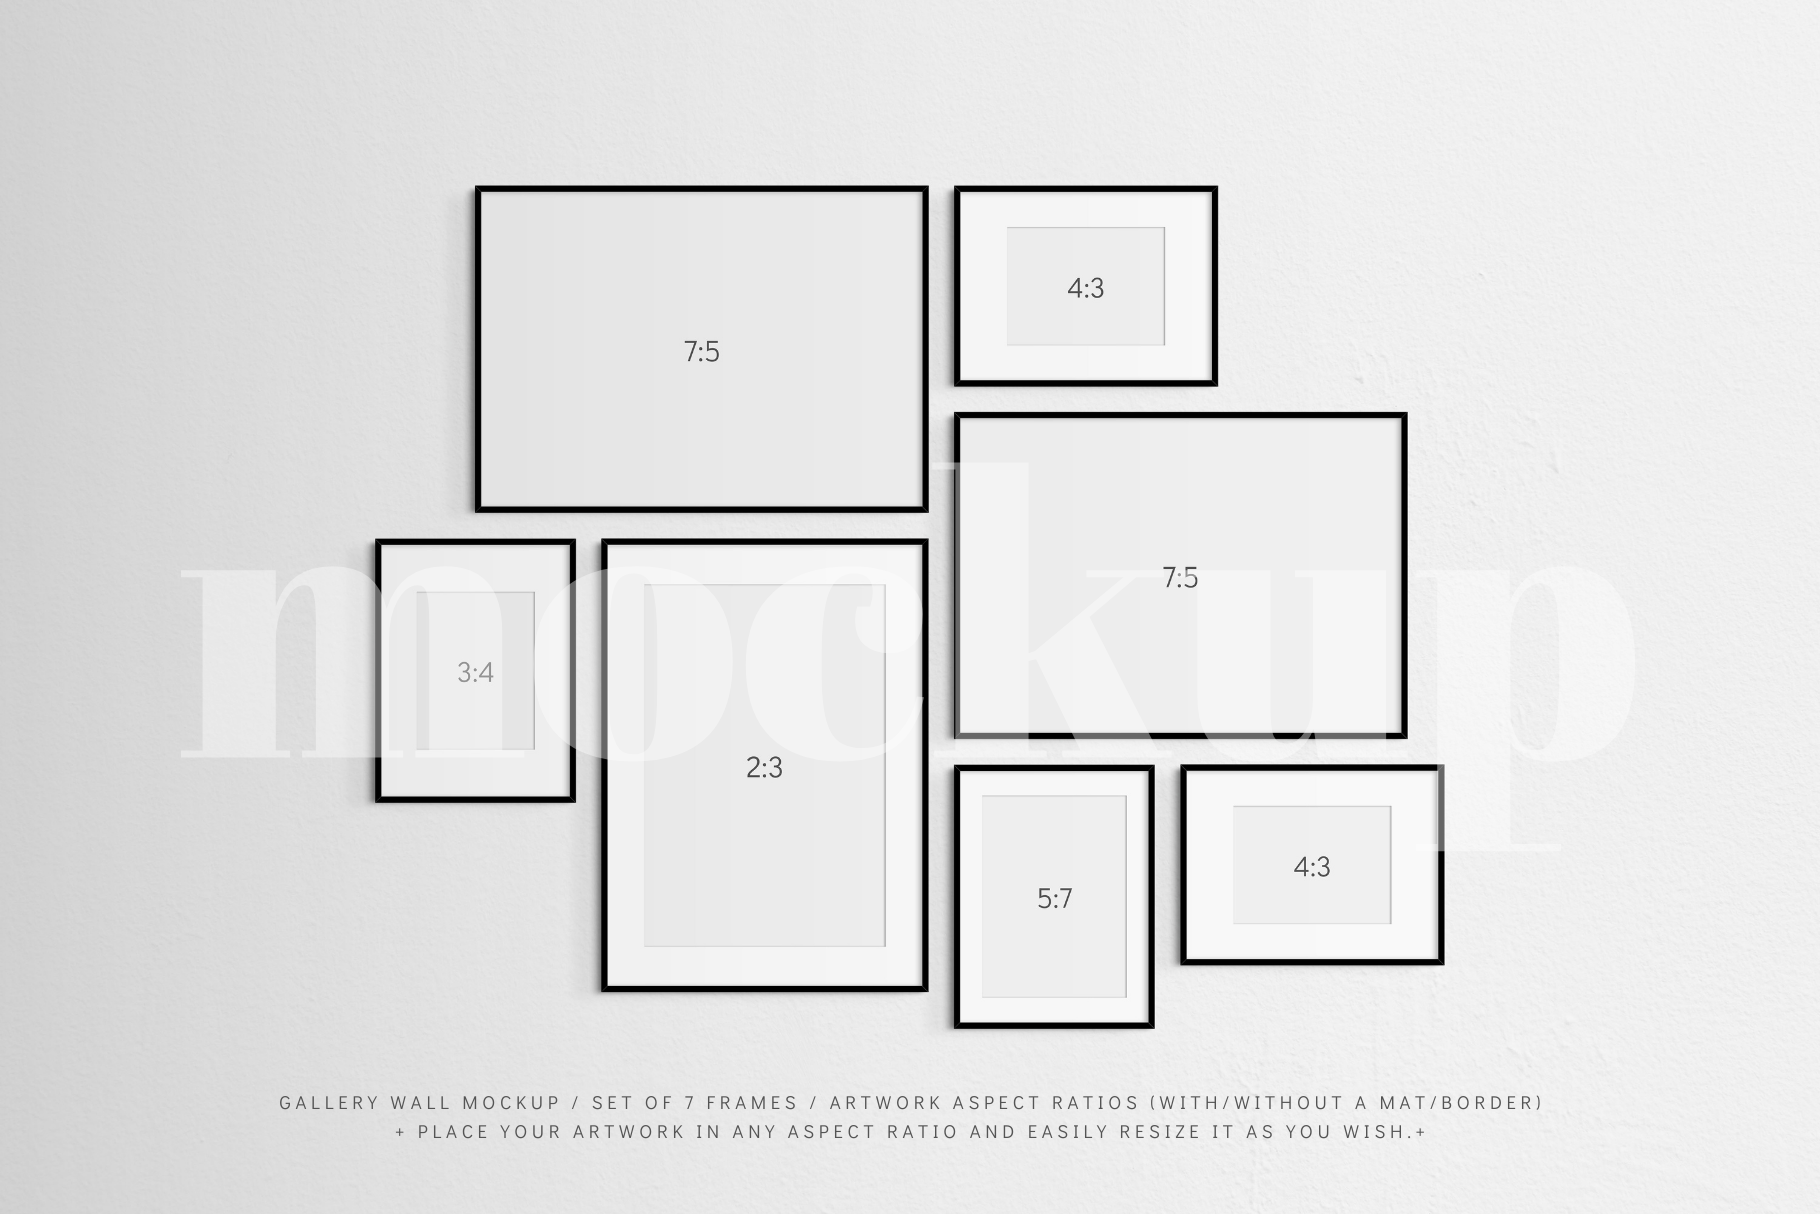 Set of 7 black frames. A customizable and easy-to-use gallery wall frame mockup.